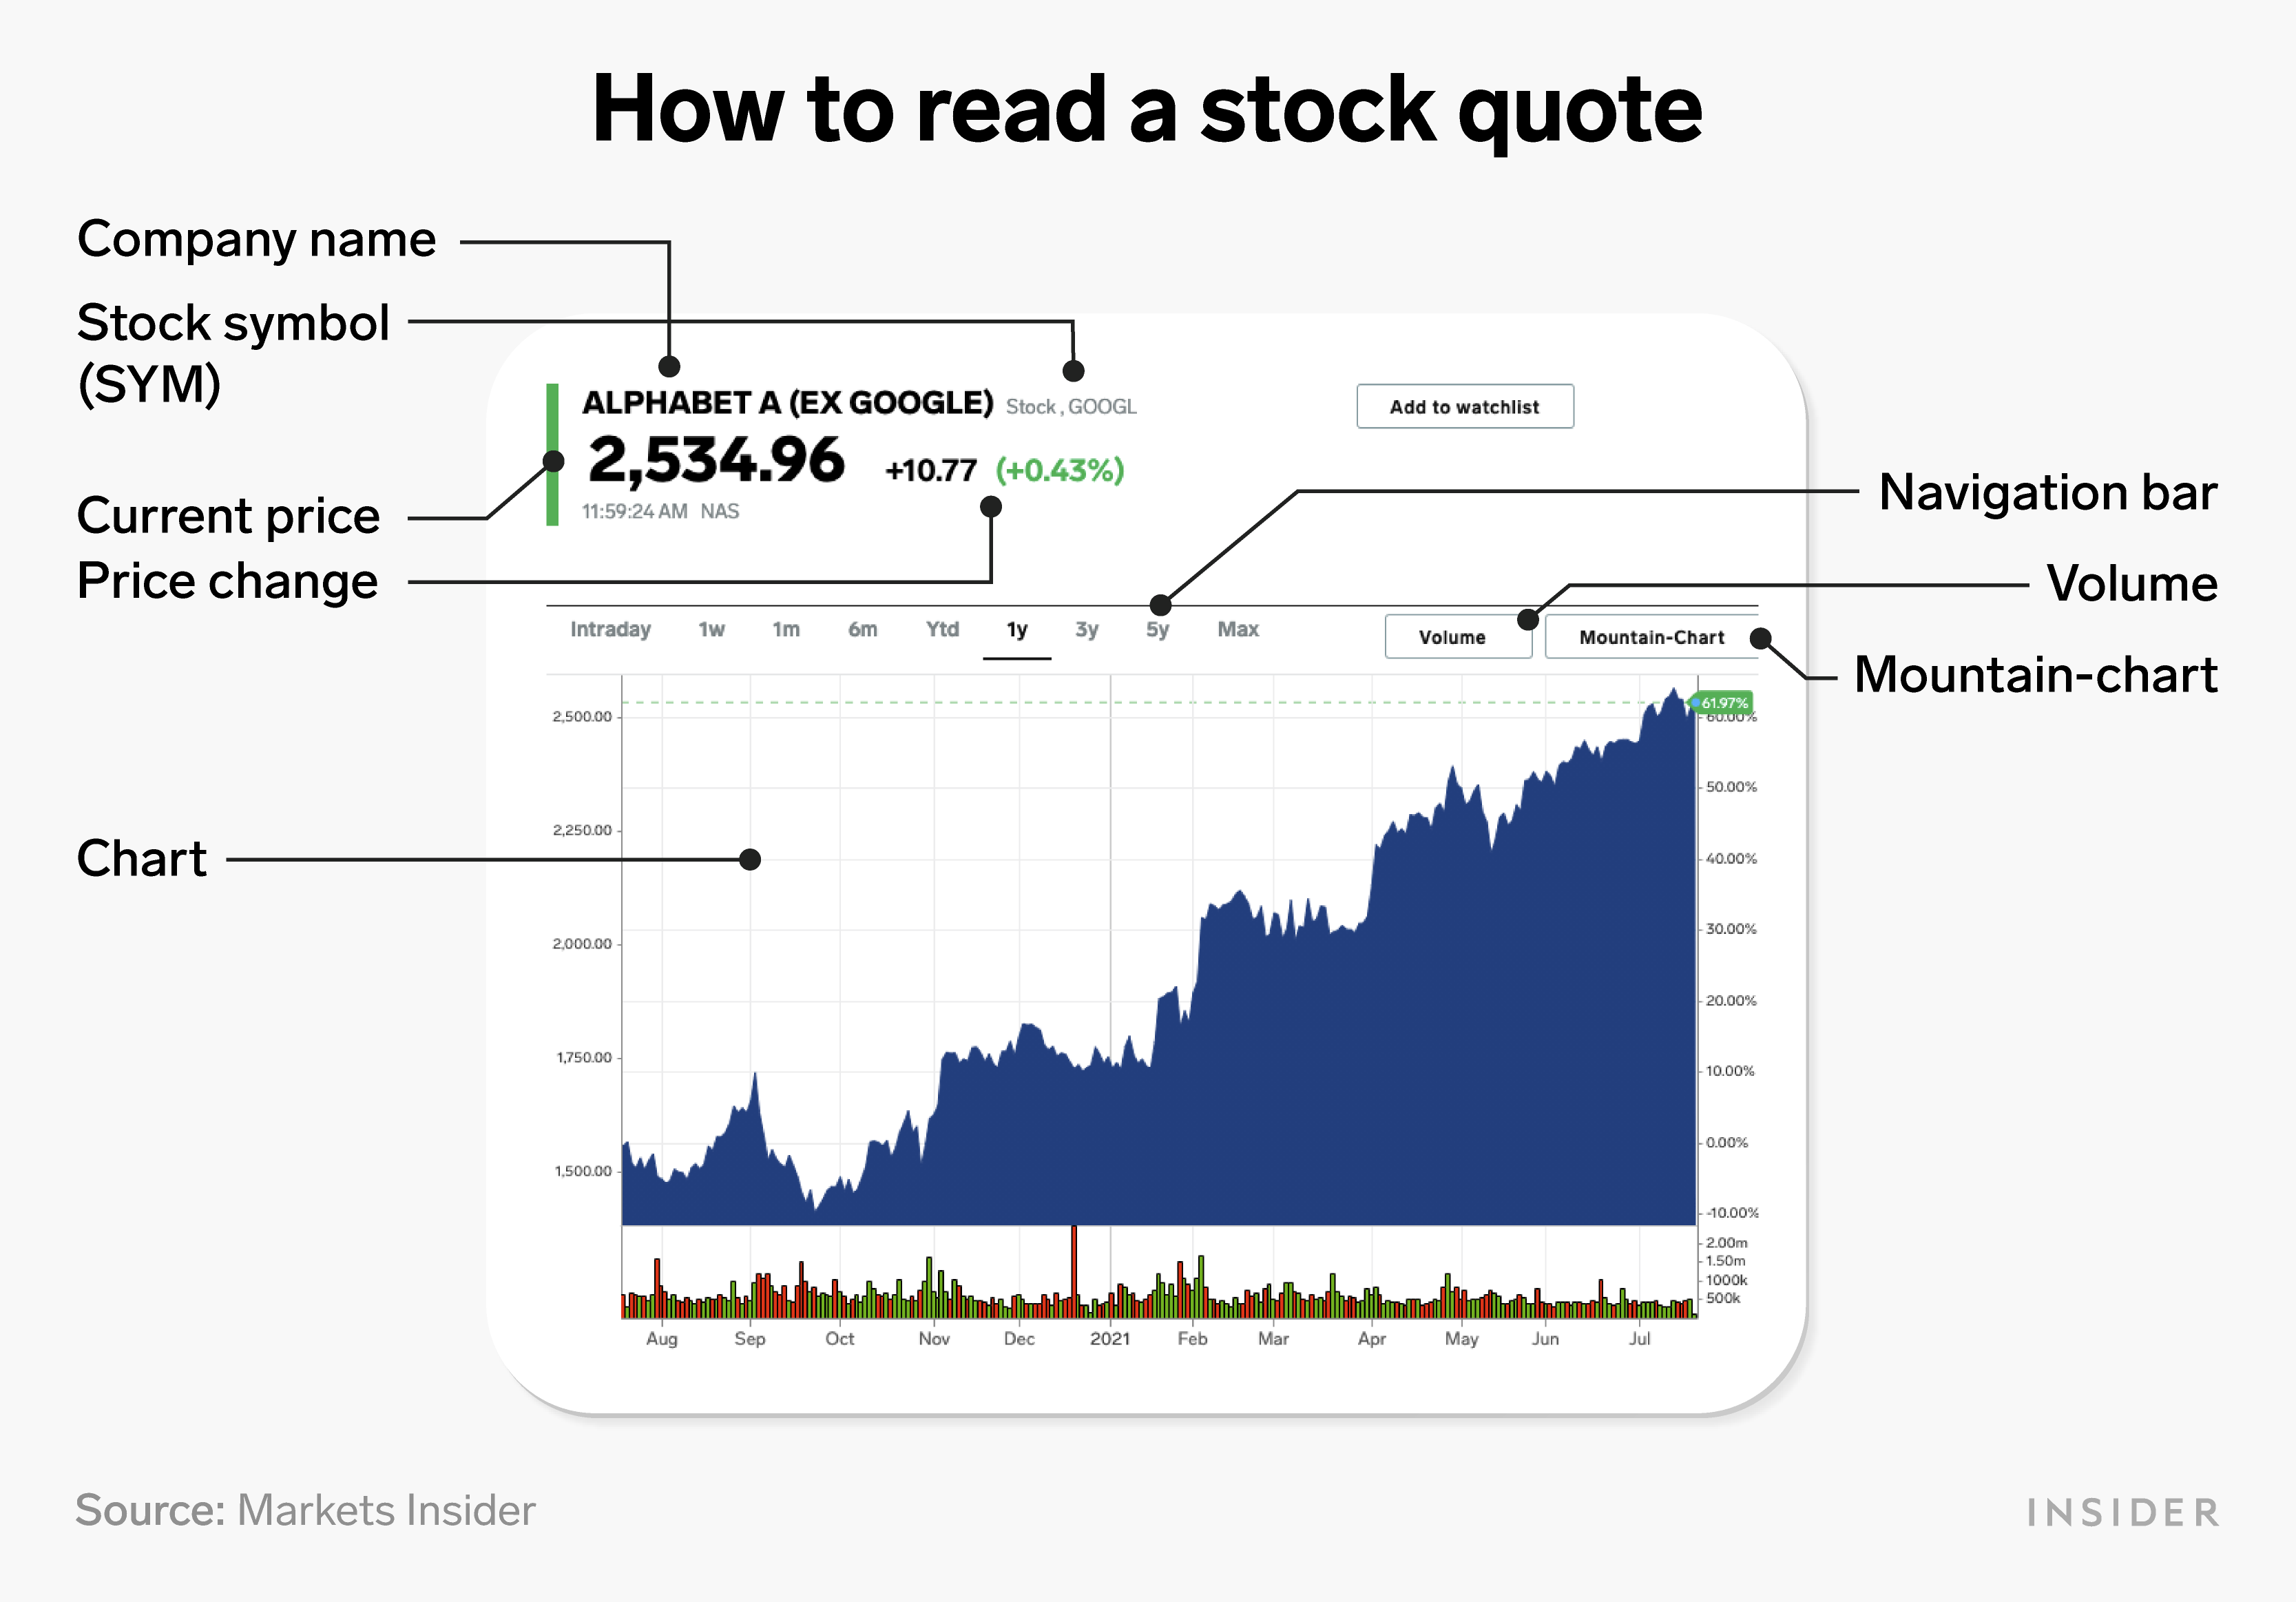 How stock quotes can better inform your investing decisions